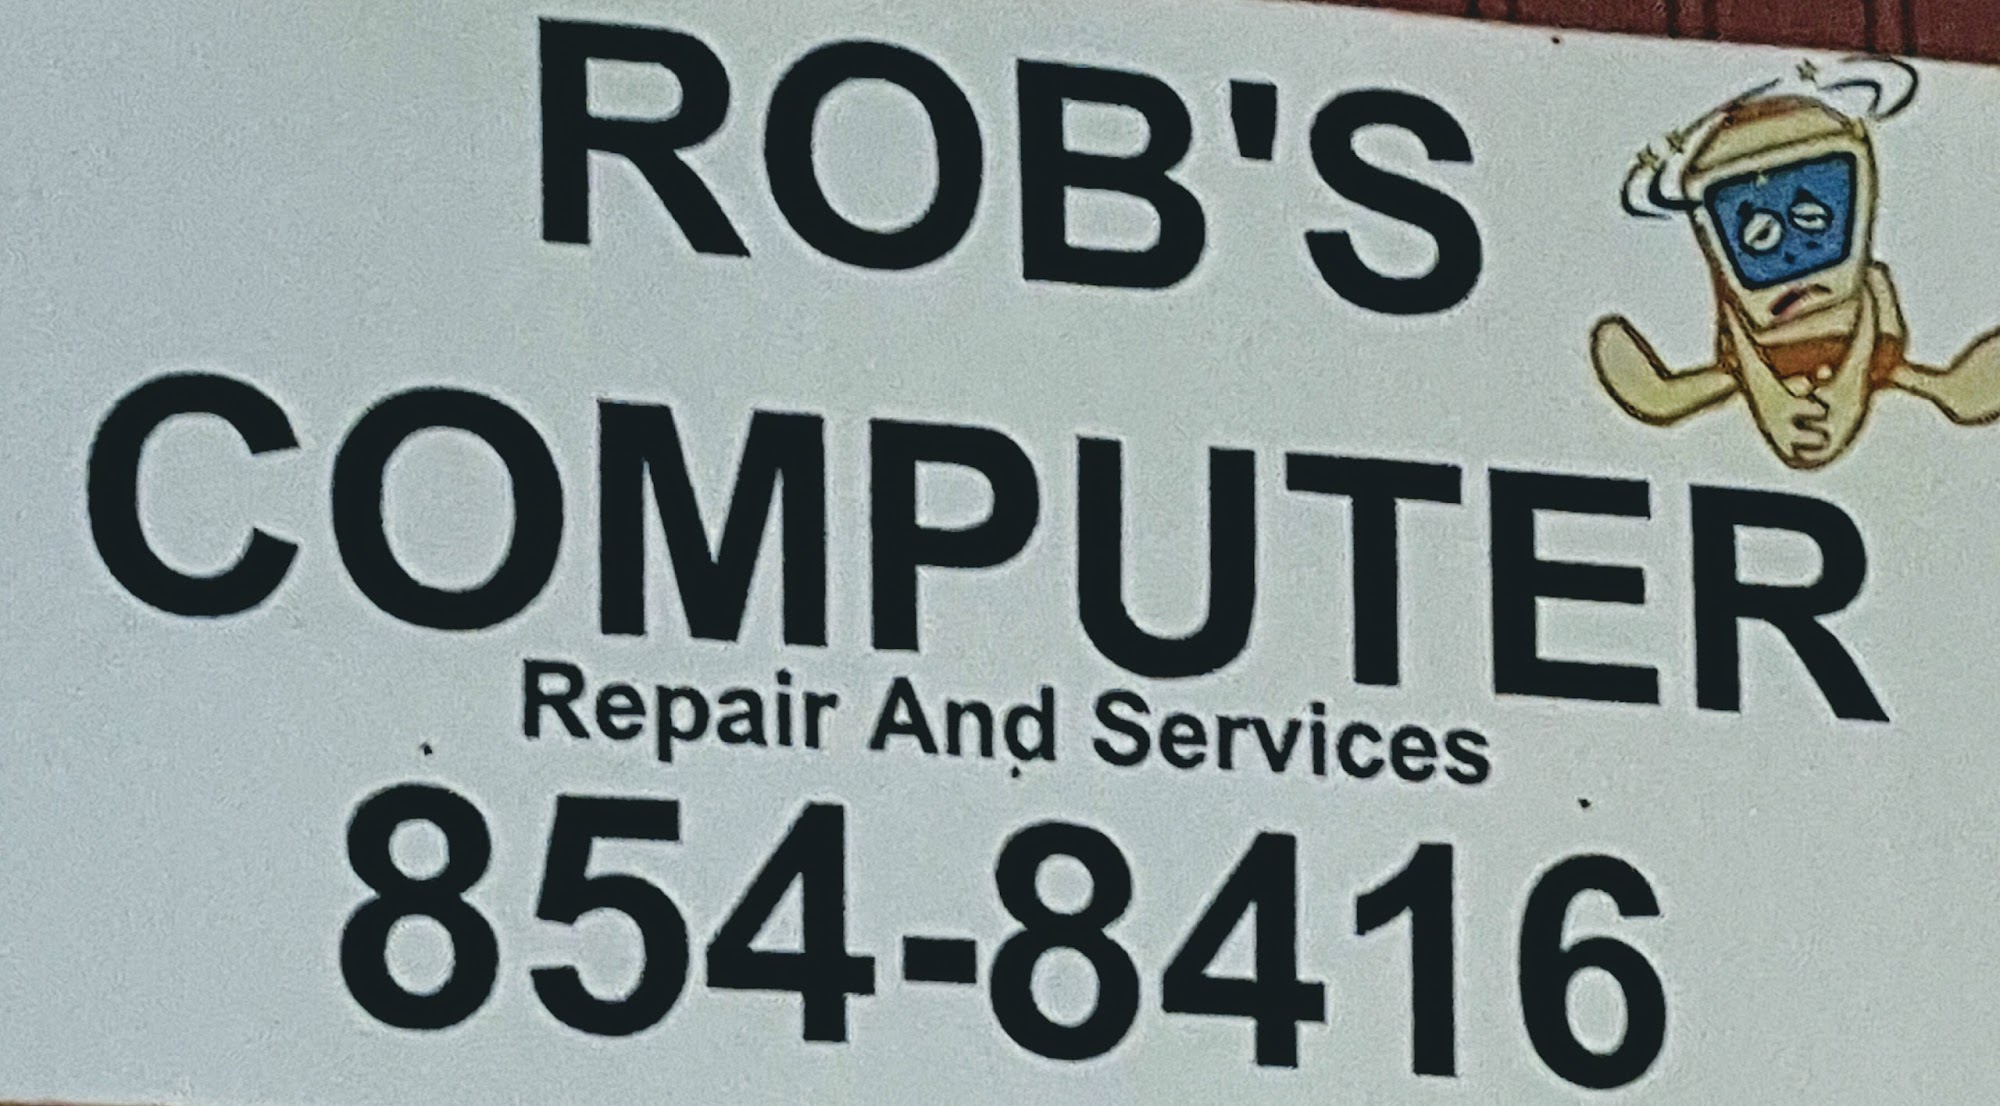 Rob's Computer Repair and Services 38 Foundryville Rd, Berwick Pennsylvania 18603